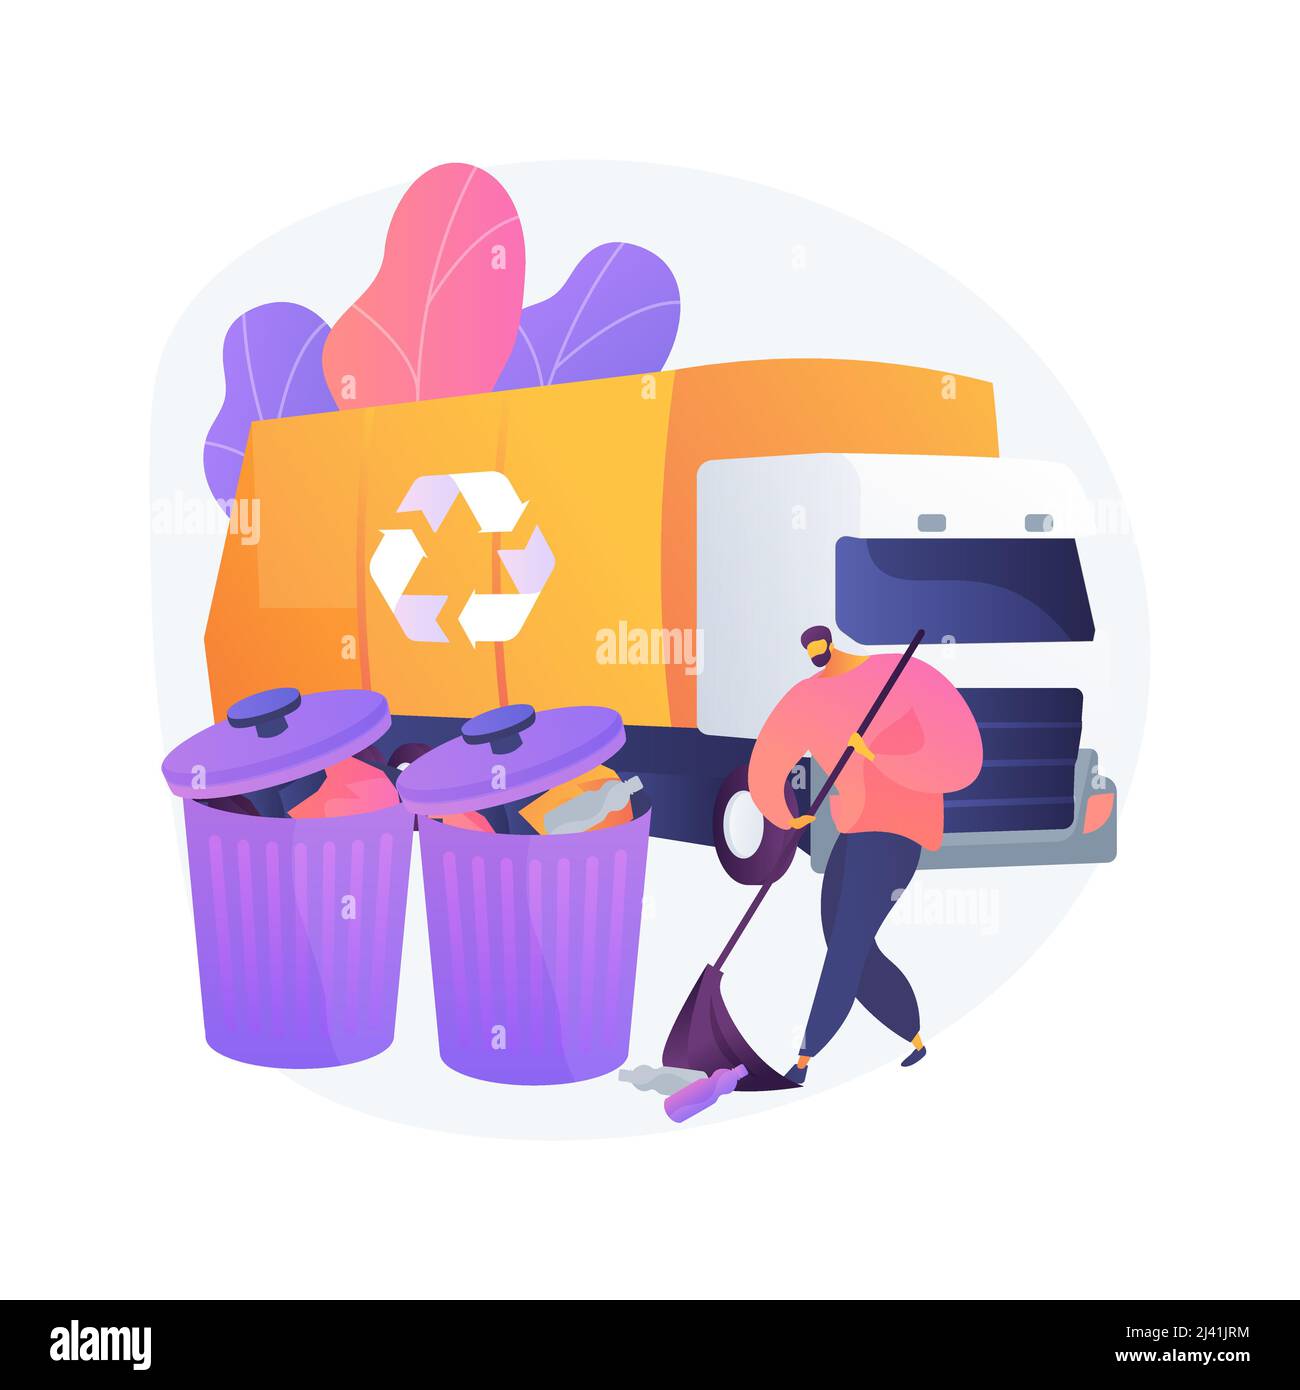 Junk removal abstract concept vector illustration. House maintenance, gardening service, autumn debris cleaning, yard waste disposal, shed demolition, Stock Vector